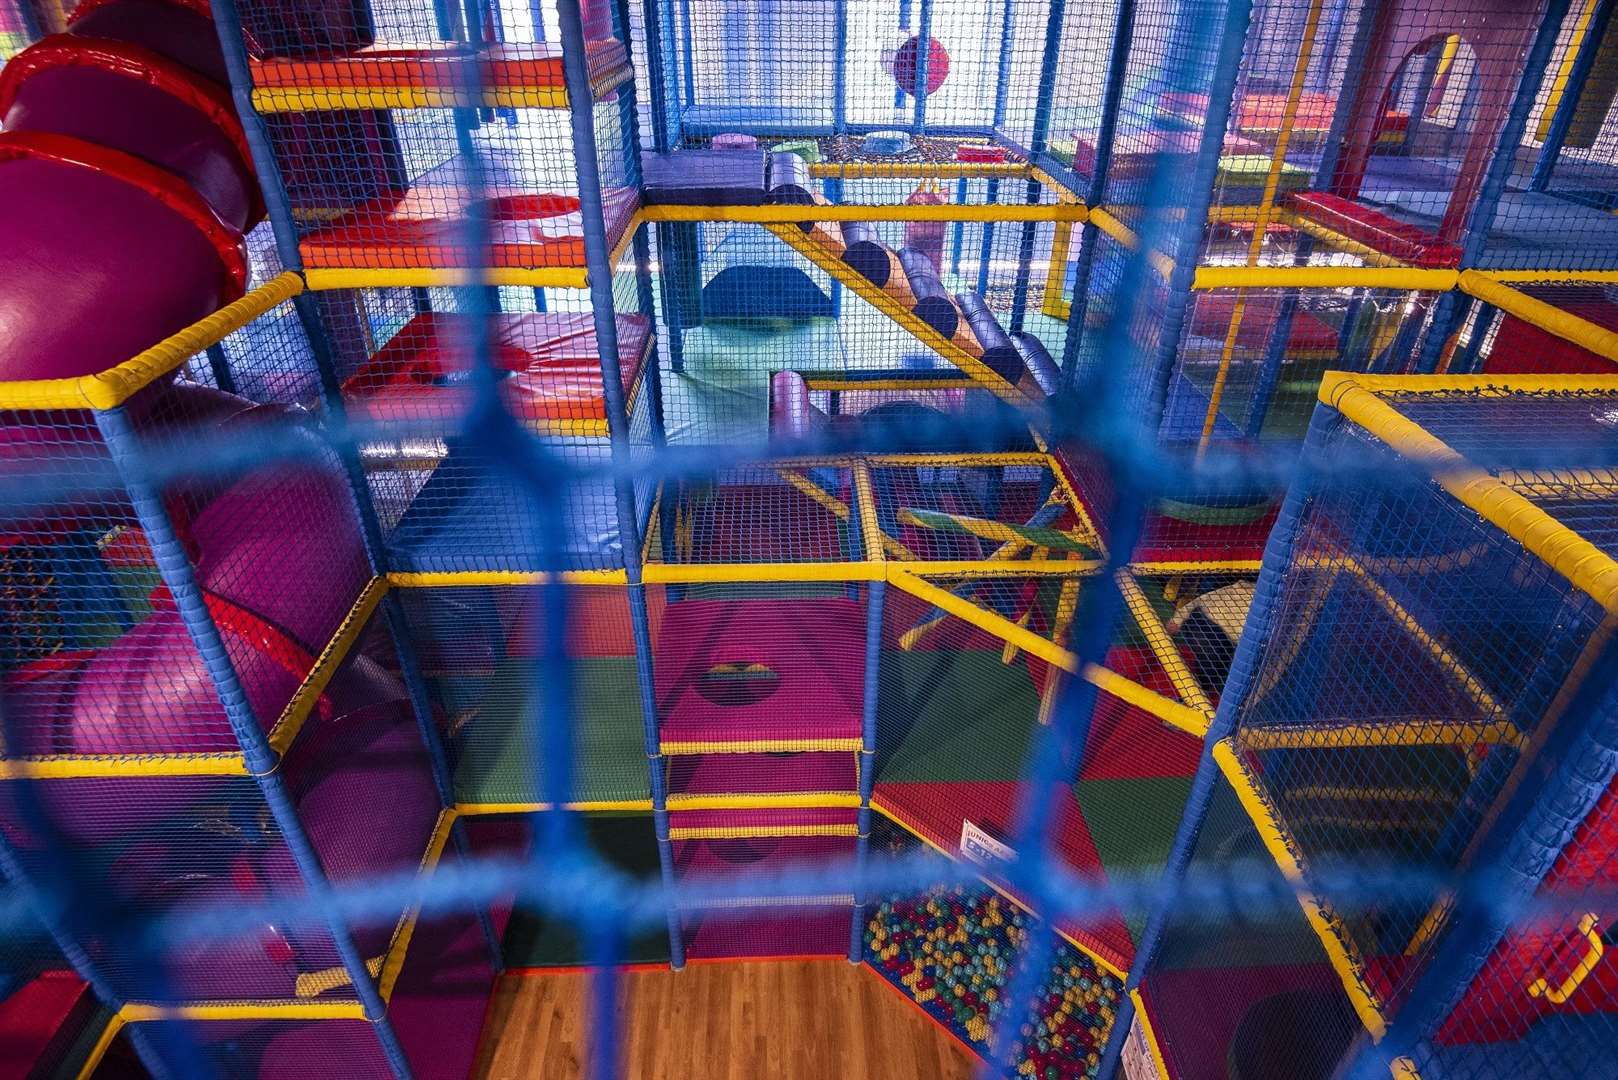 The maze-like play area will give parents a chance to relax, possibly with a Costa in hand